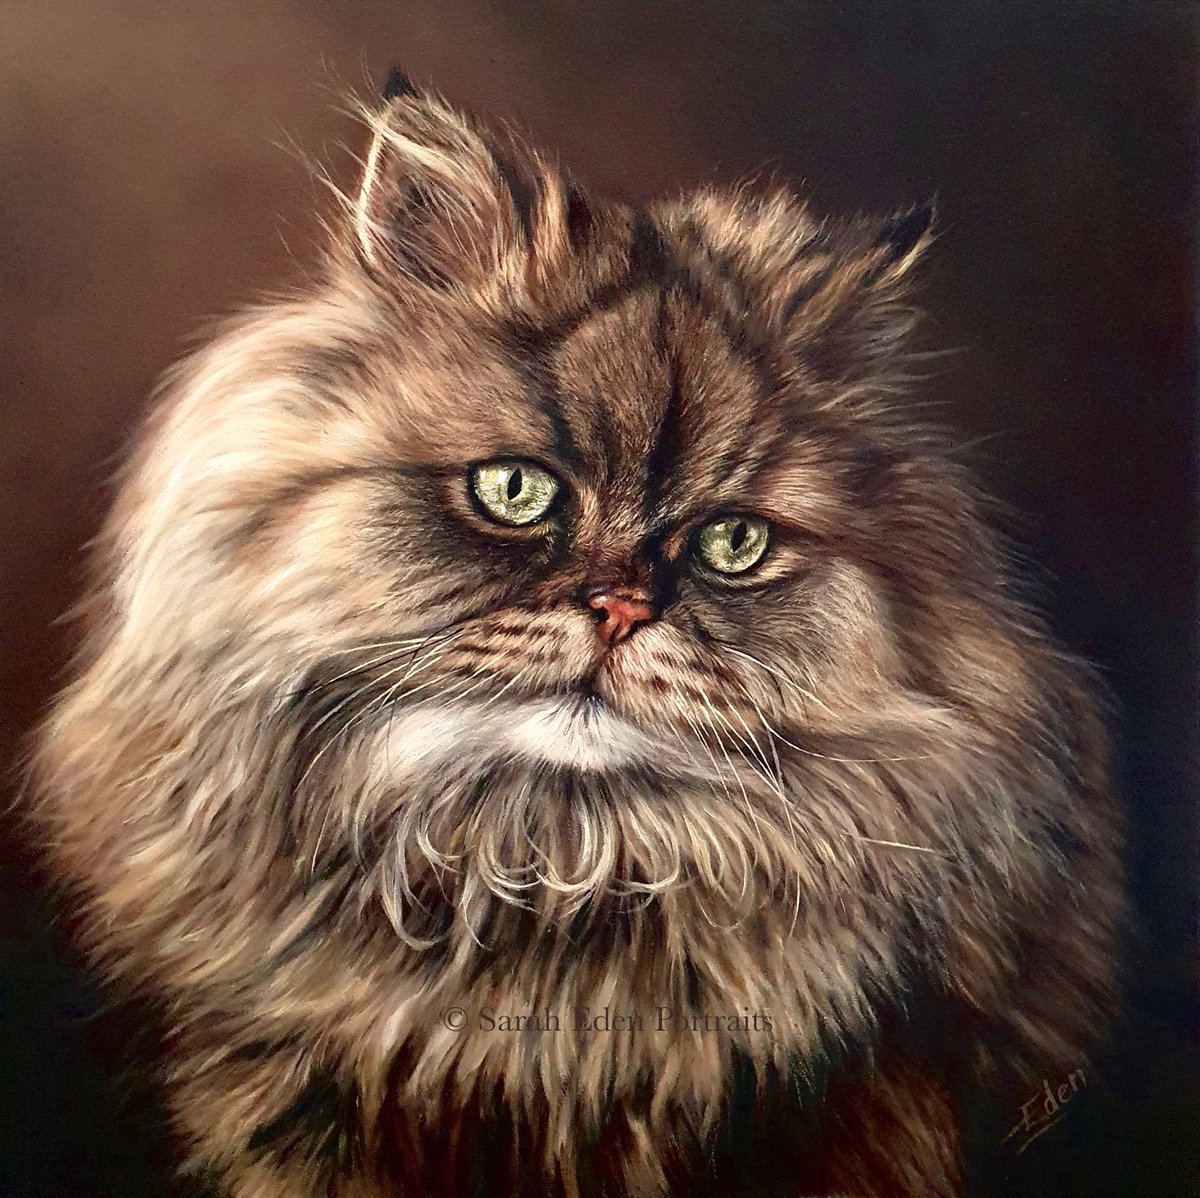 Small portrait from last year. Loved painting that luscious coat. 

'Gizmo', oil on board, 12 x 12'

#cat #catpainting #longhairedcat #longhairedcatsofinstagram #tortoiseshell #tabbycat #longhairedtabby #longhairedtortie #catoilpainting #catportrait #portraitsofinstagram